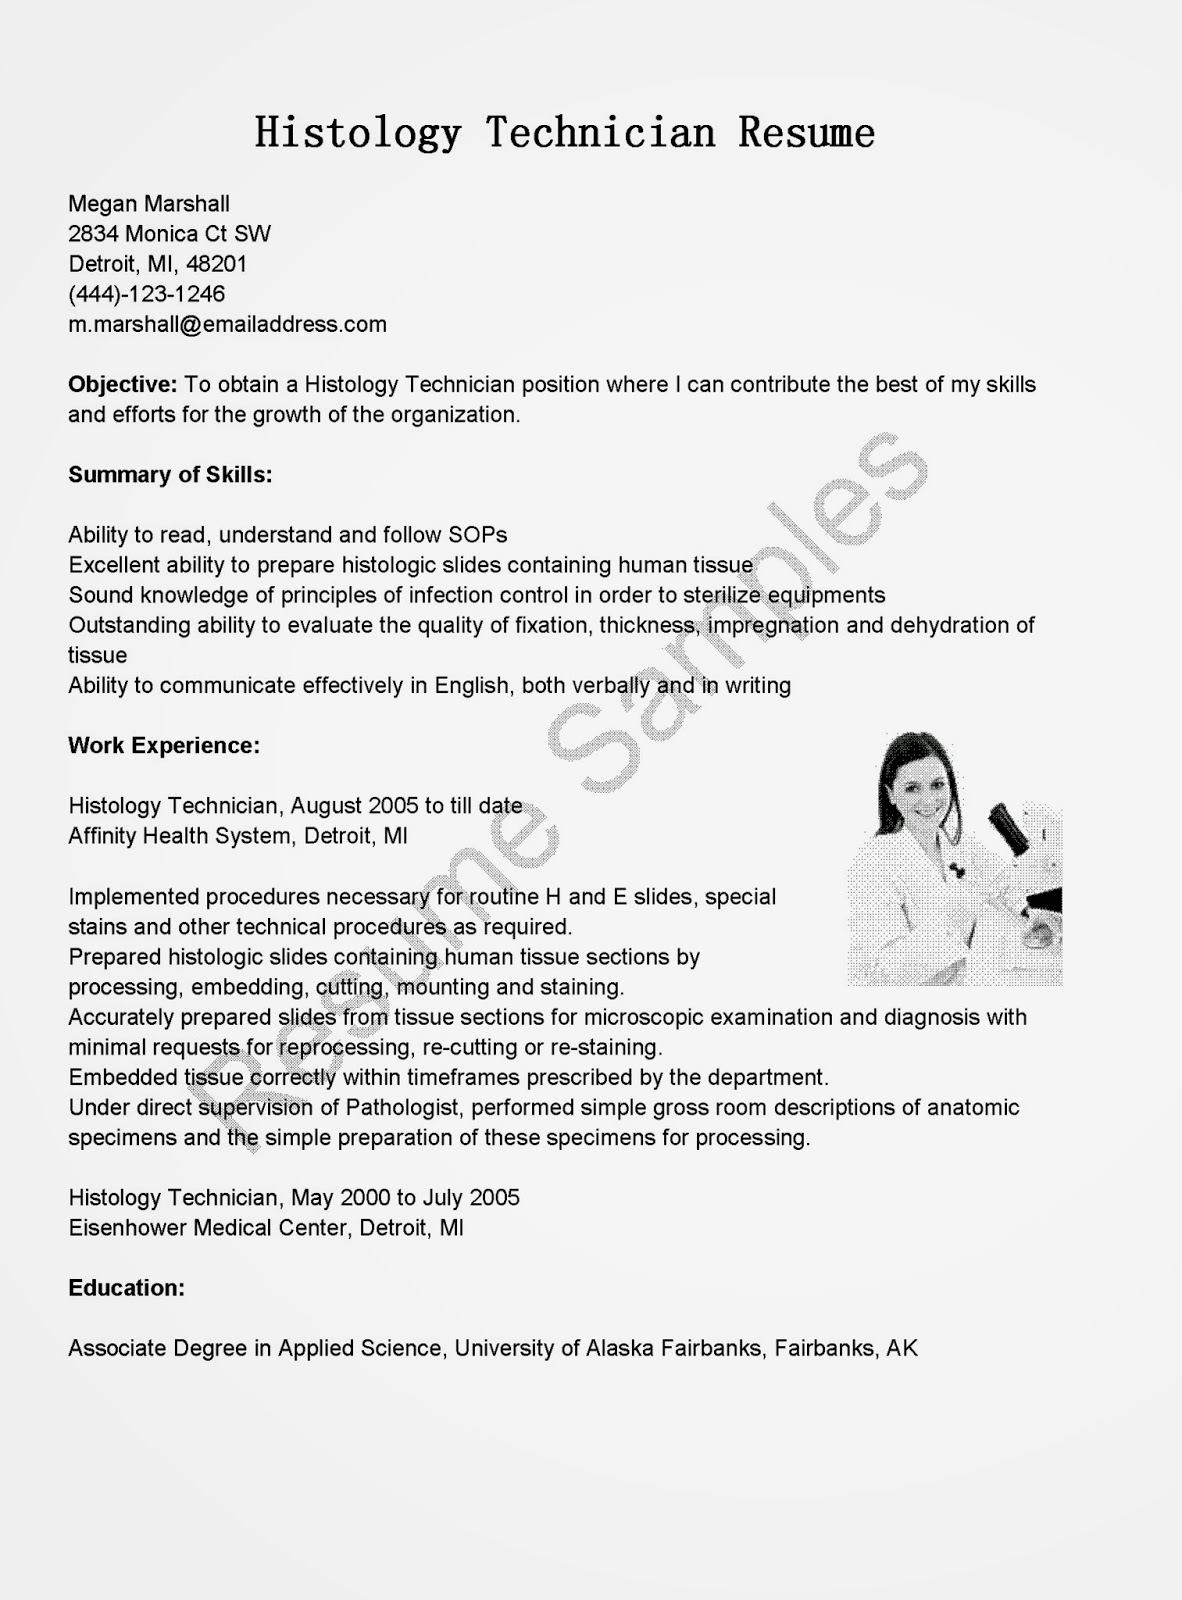 Resume examples for technicians